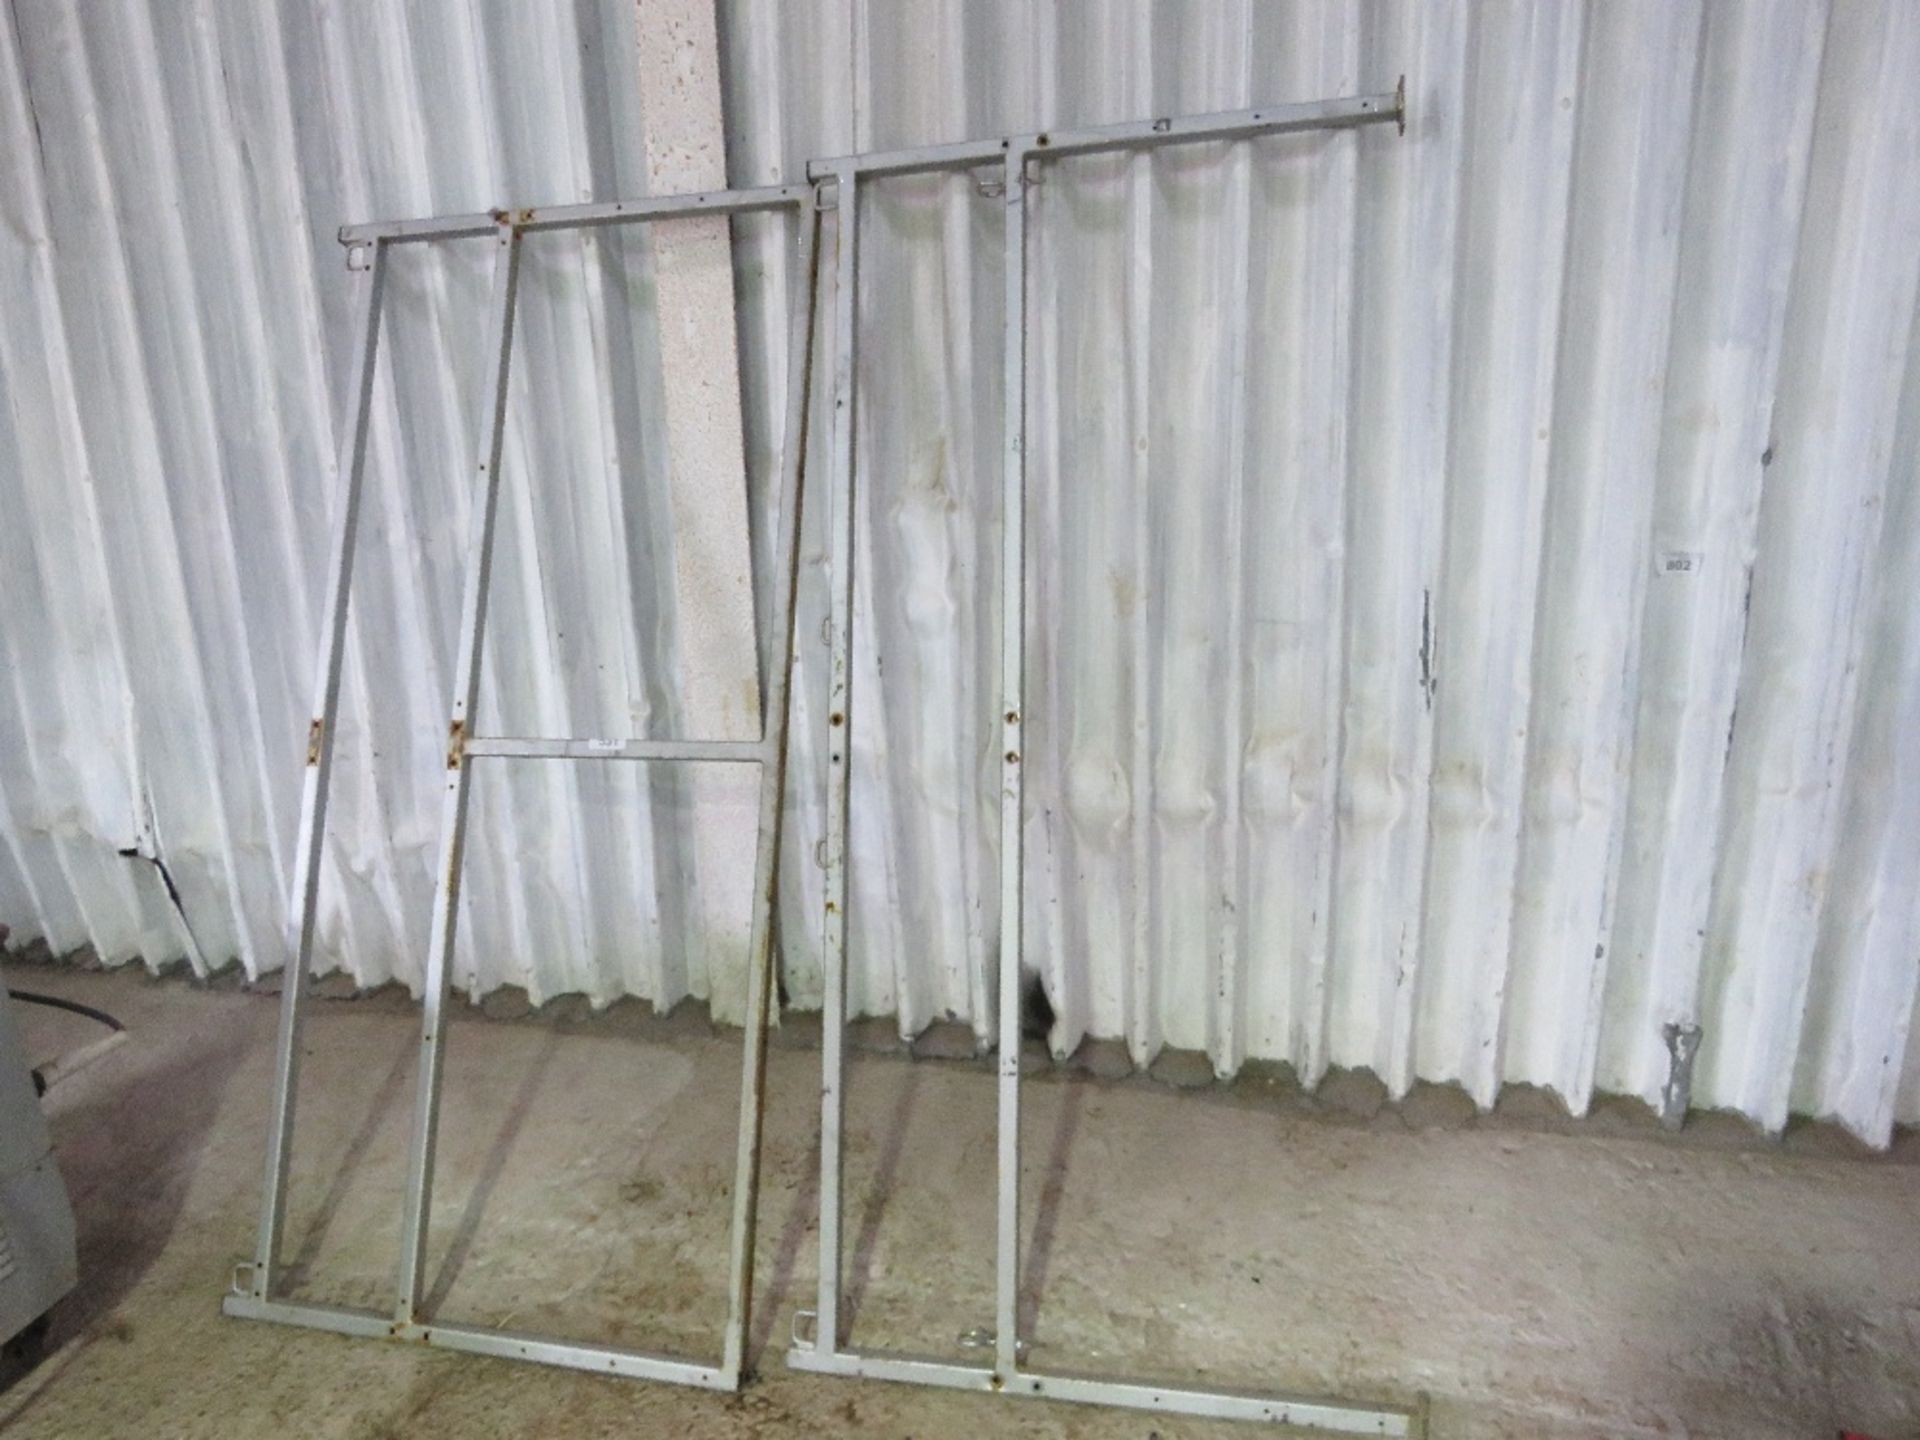 2NO TRAILER EXTENSION SIDES, 6FT LENGTH APPROX.